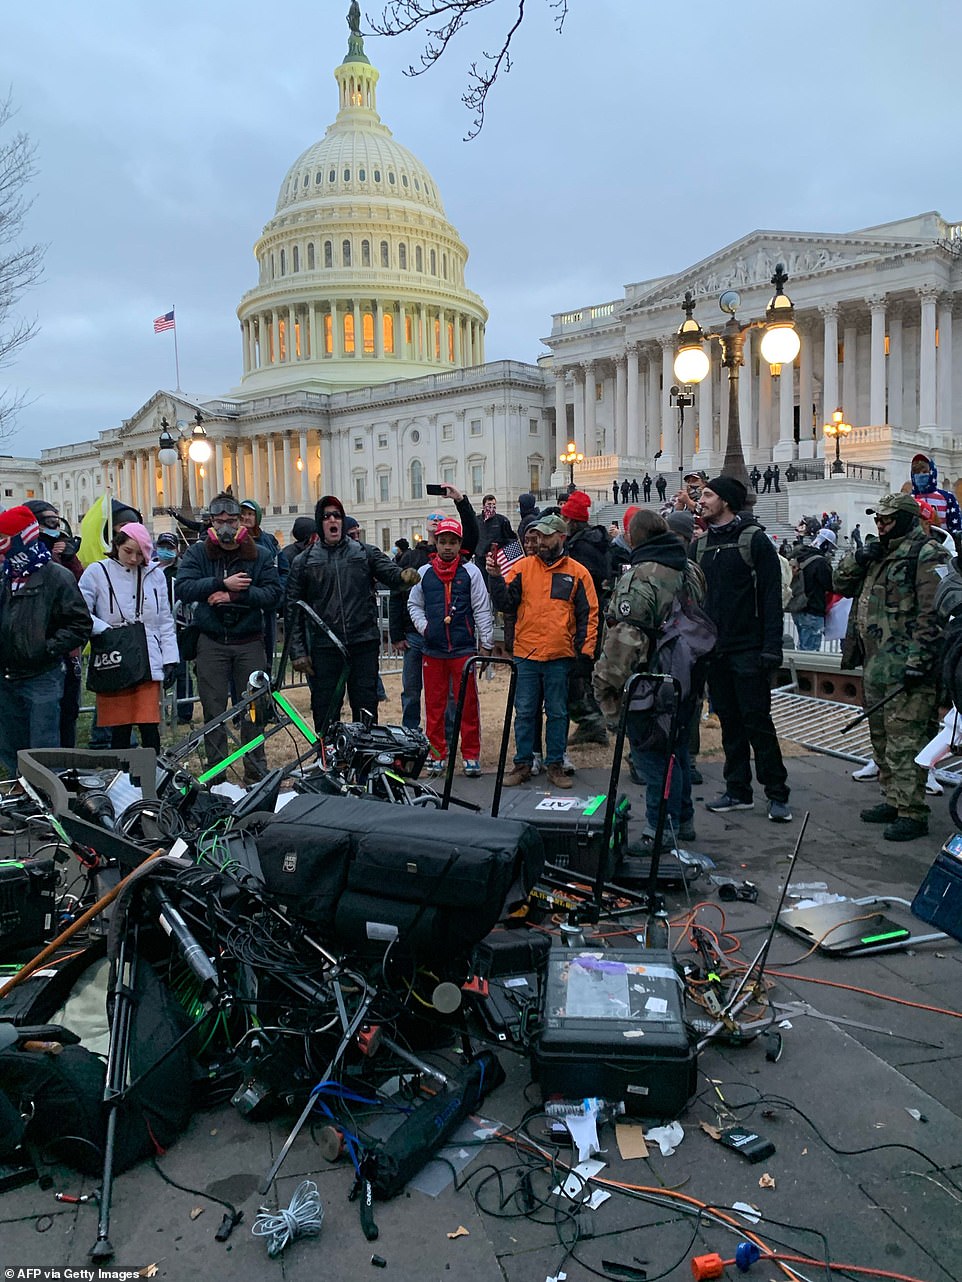 MAGA rioters have turned on the media, destroying television cameras and chasing down news crews trying to report on the carnage at the US Capitol that has so far left one